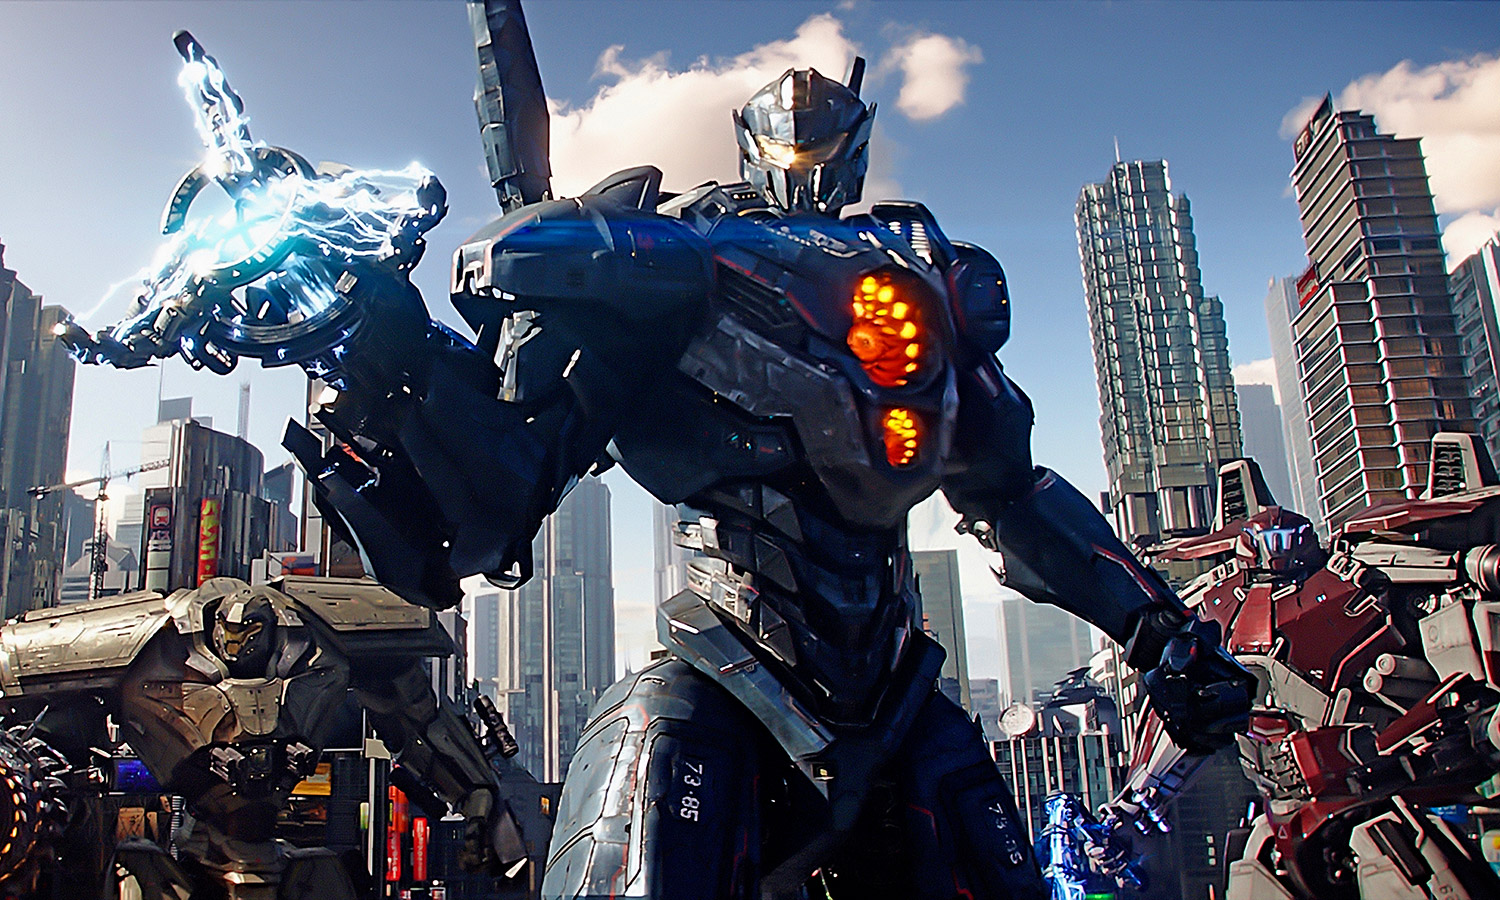 The Robots 'Pacific Rim Uprising' Use a Lesson from Science | Space